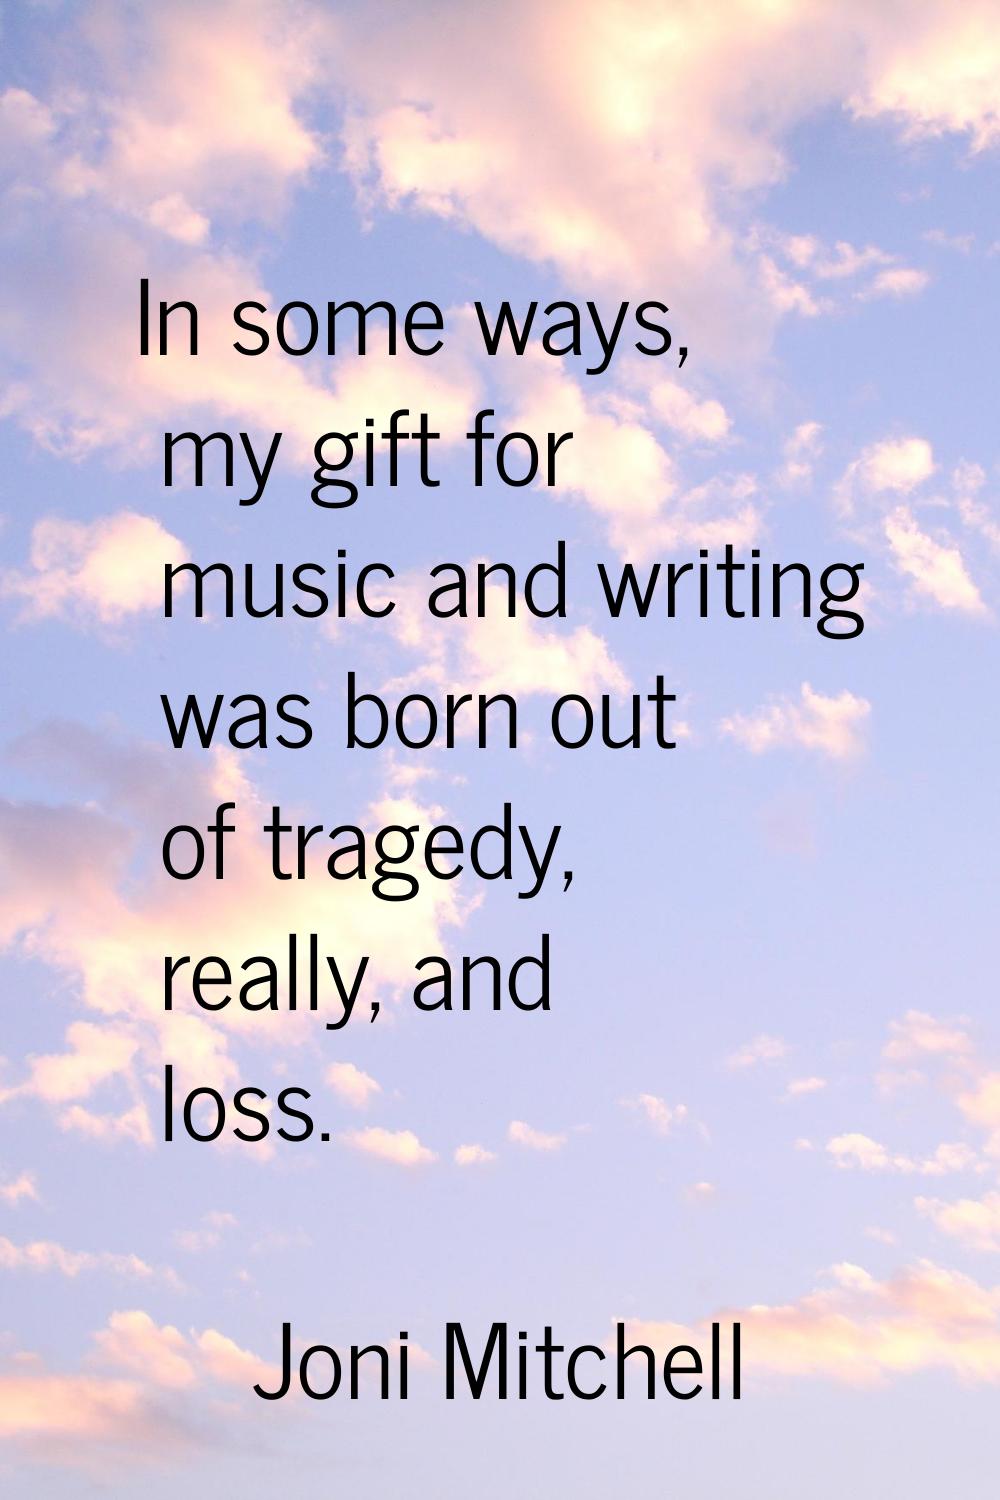 In some ways, my gift for music and writing was born out of tragedy, really, and loss.